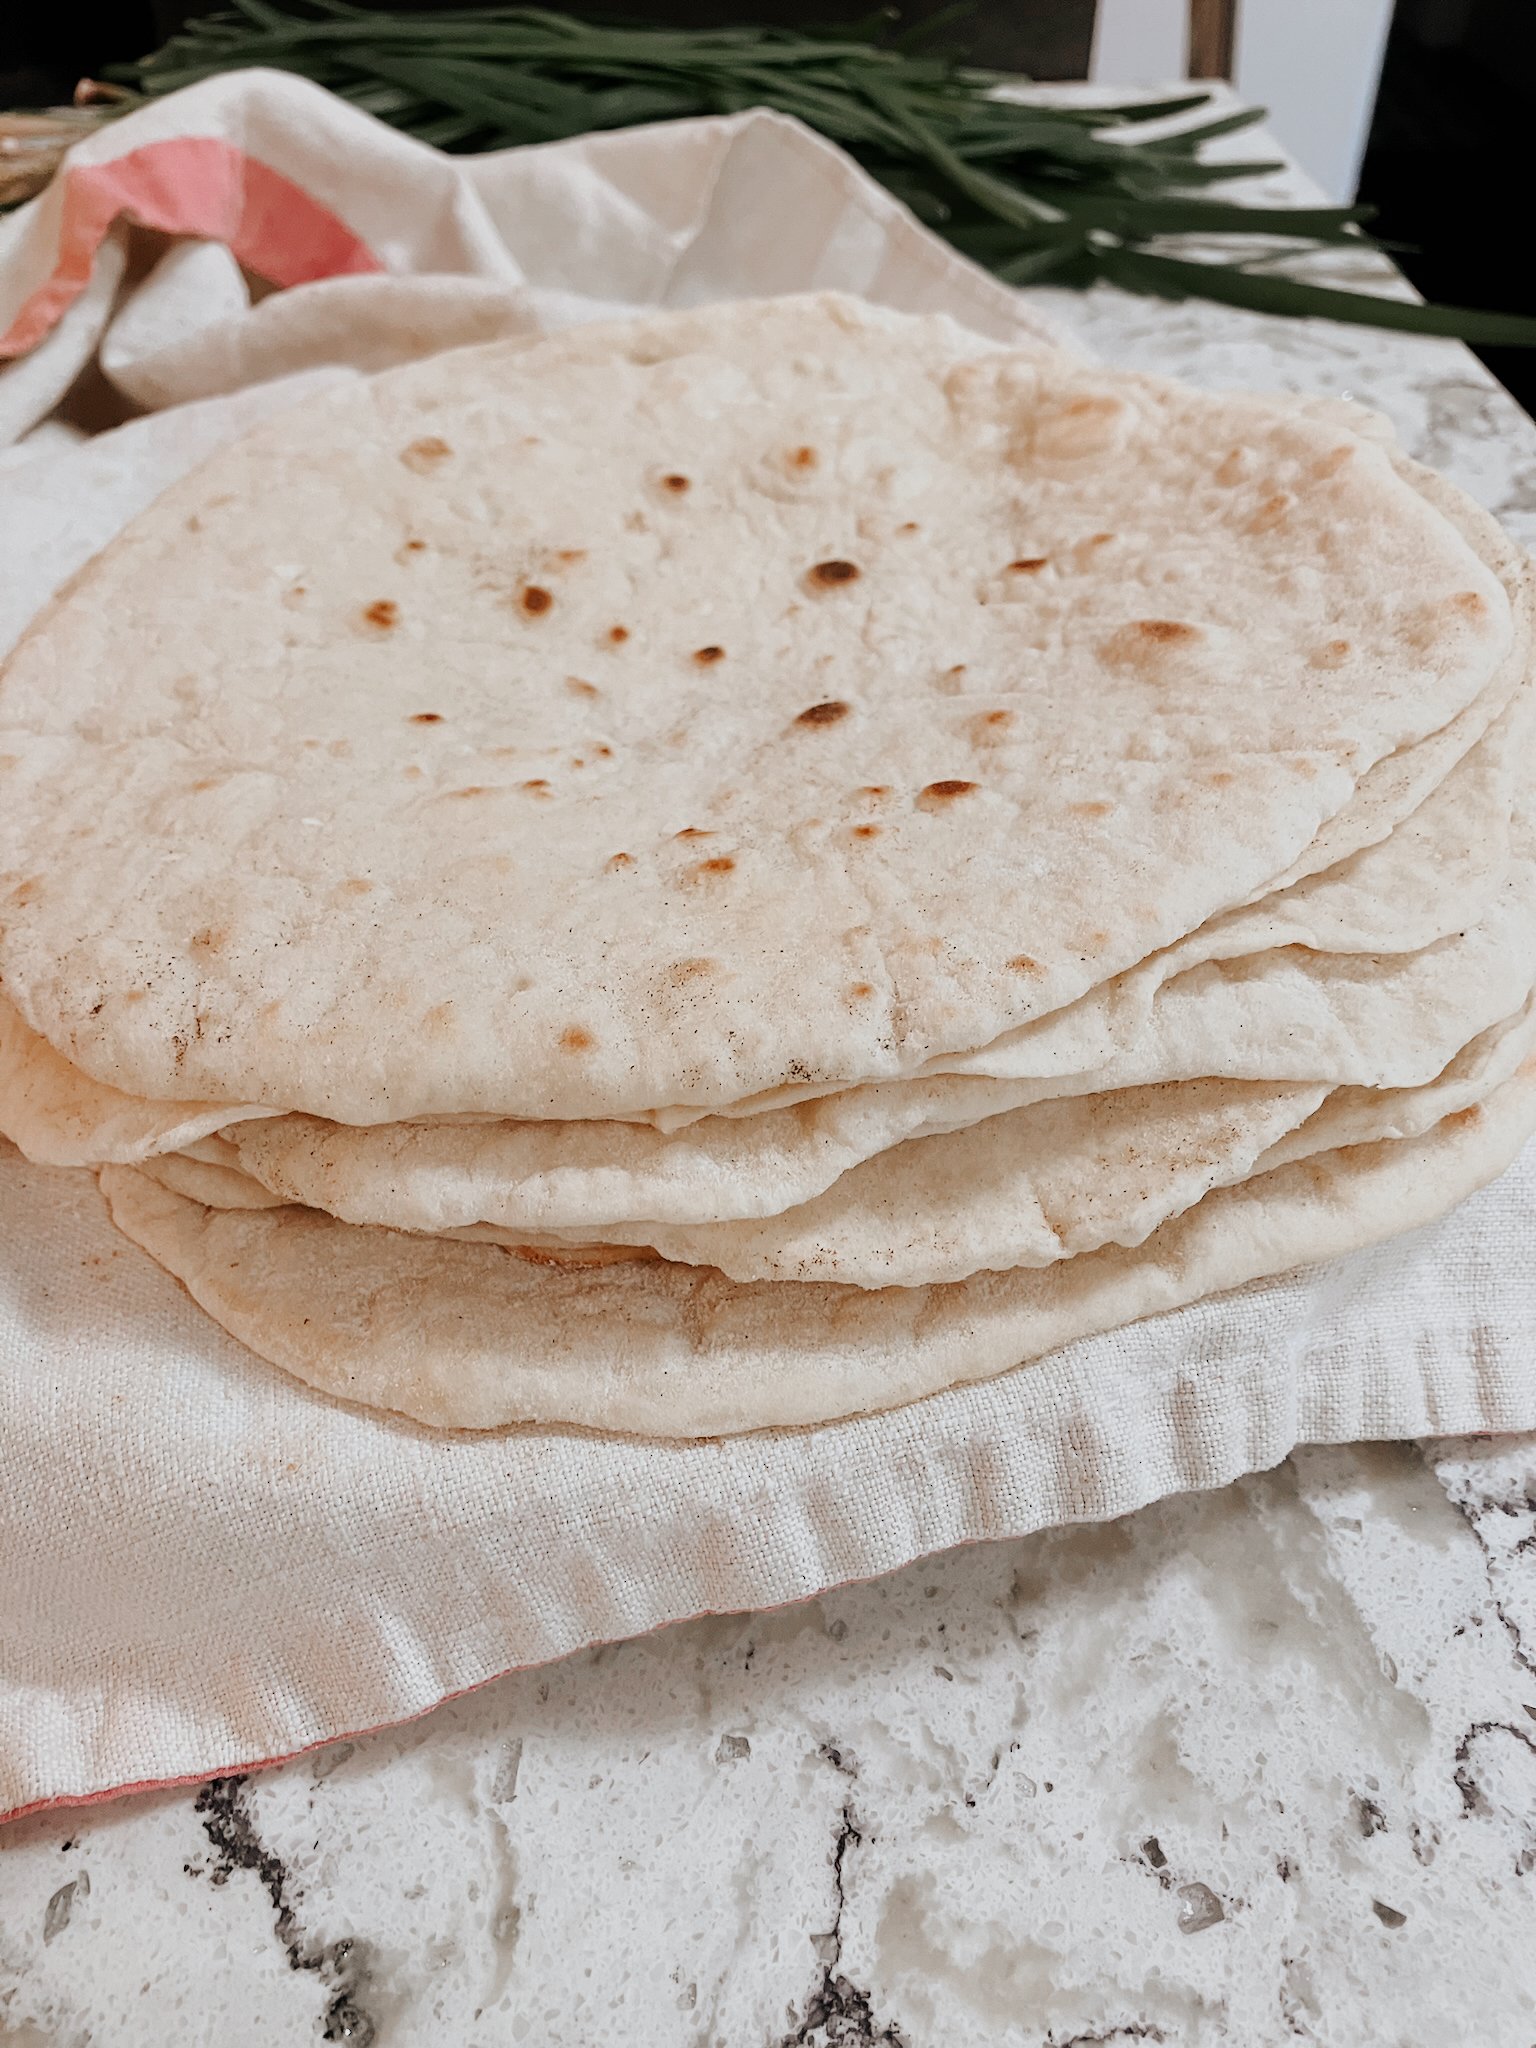 The Sourdough Tortillas: Fluffy, Soft, Fast and So Easy To Roll Out